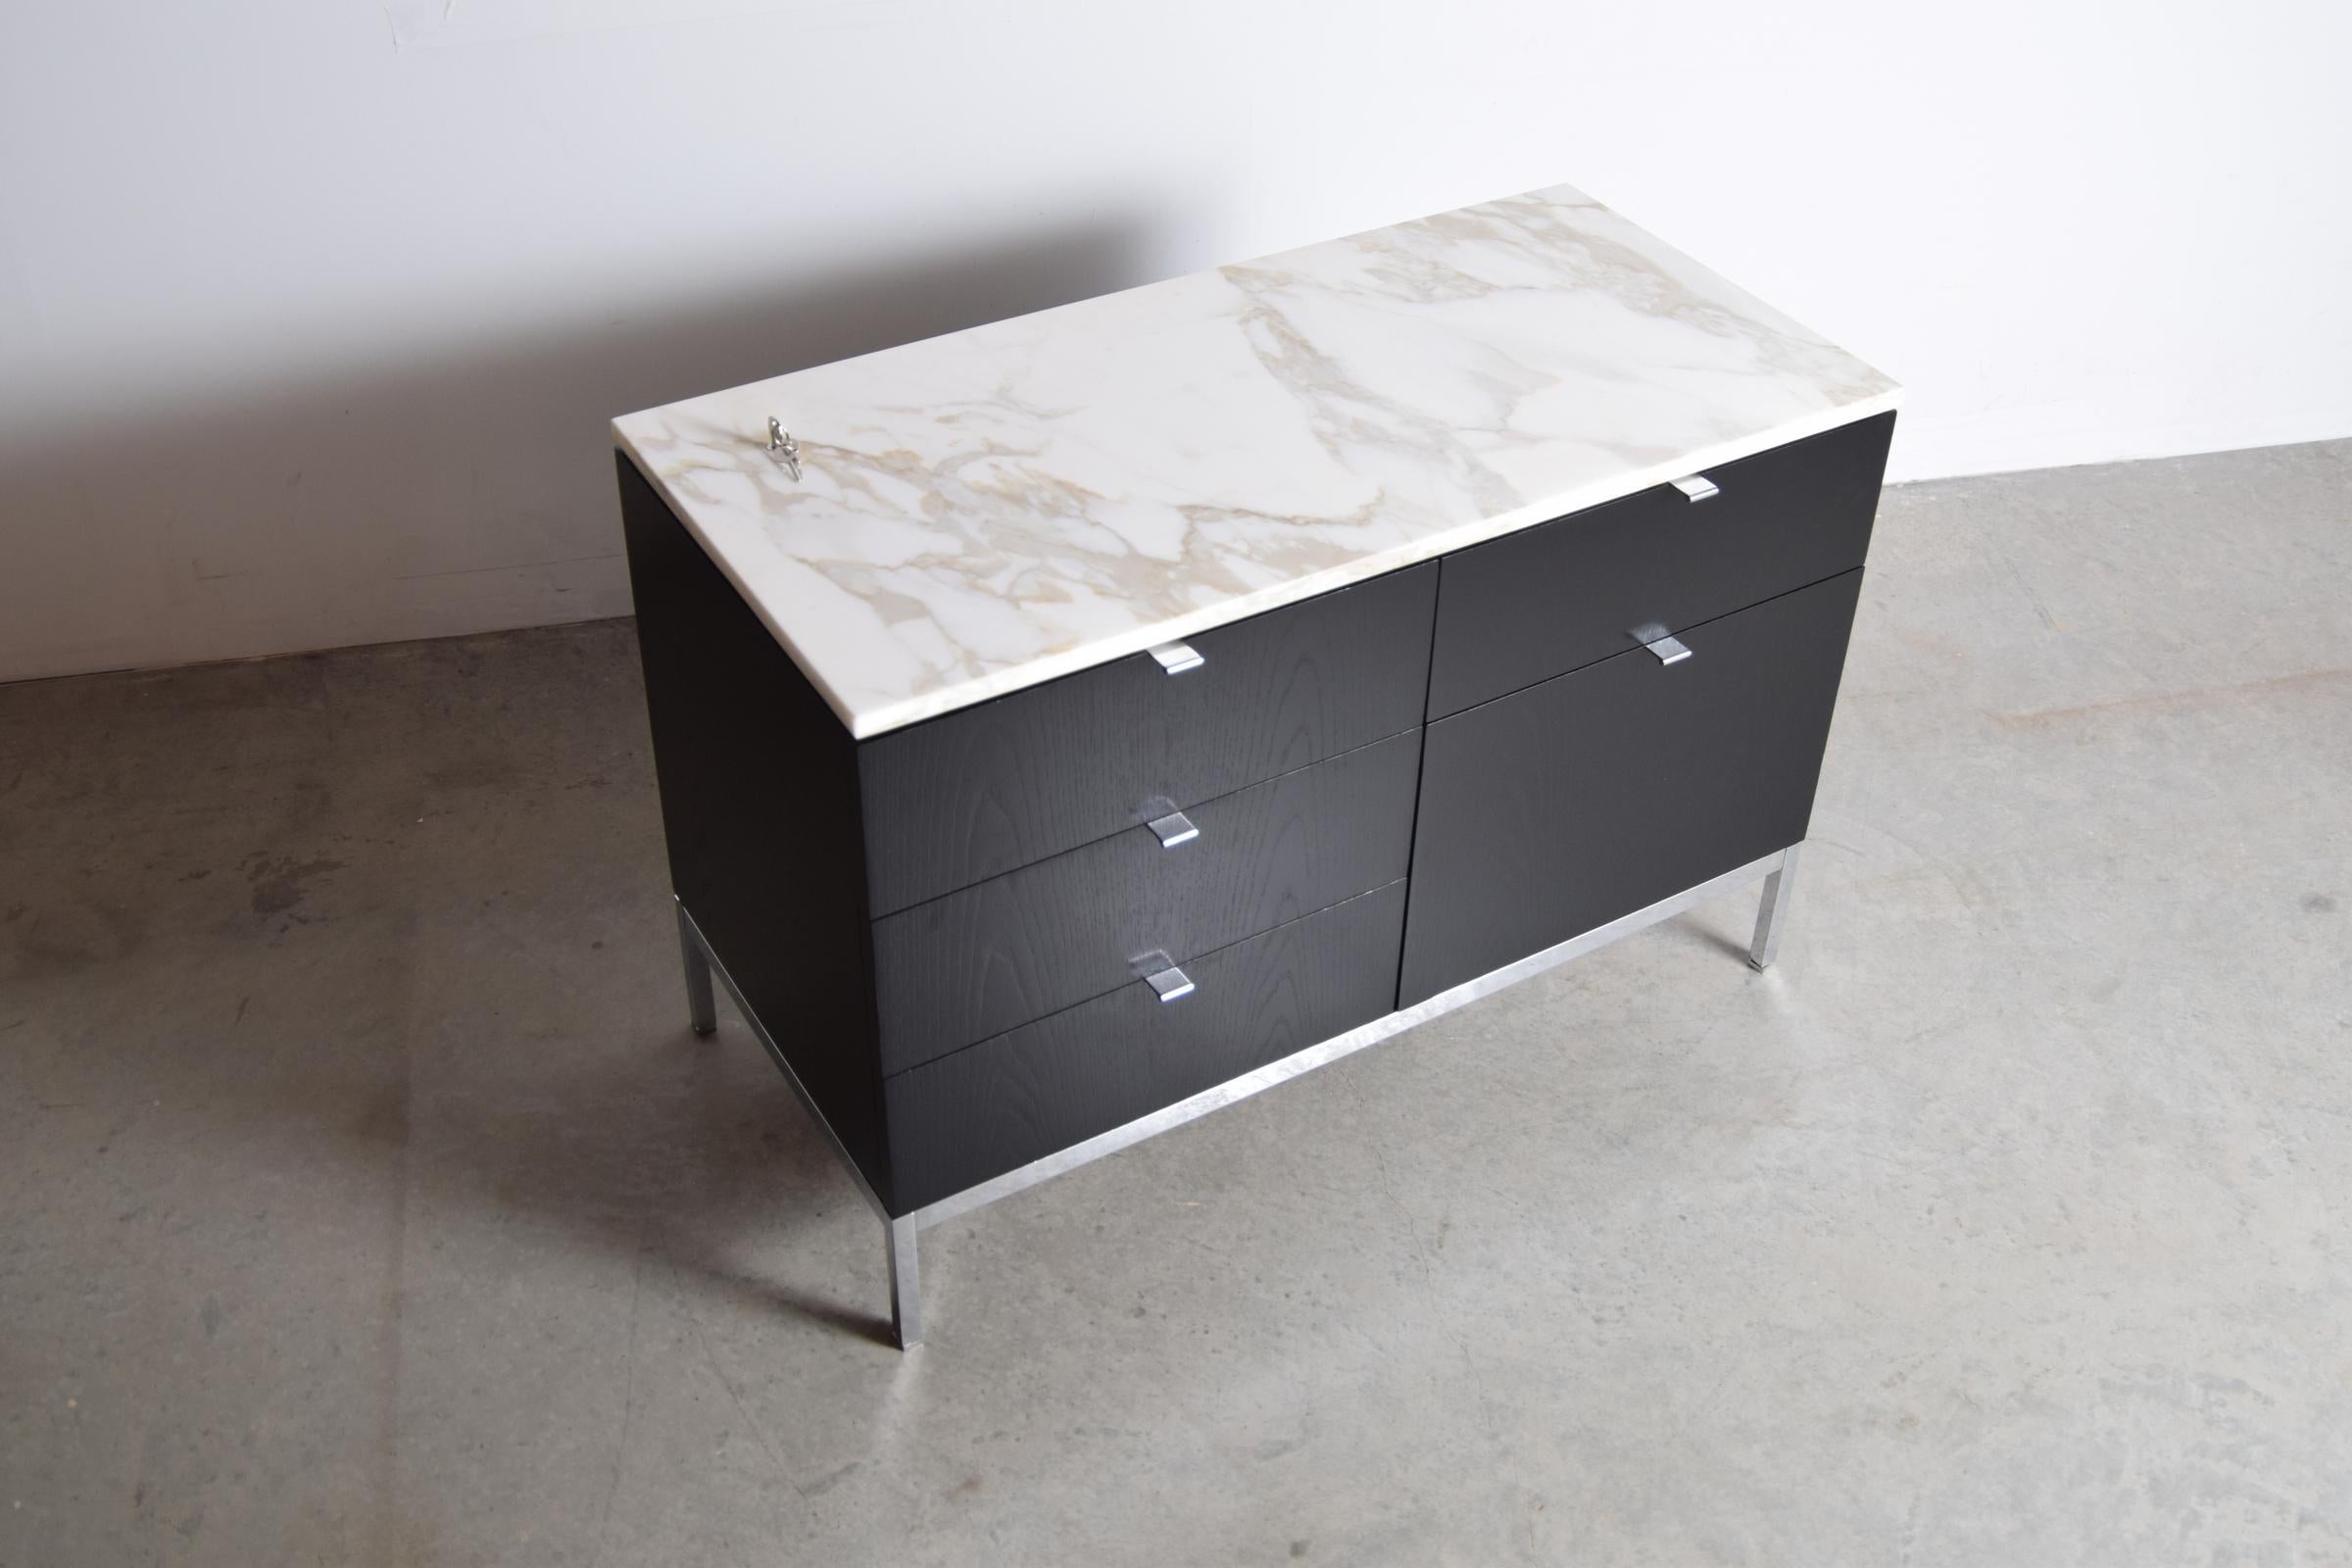 Small ebonized credenza with Calcutta Golden Vein marble top, designed by Florence Knoll, circa 1958. Credenza measures 37 1/4